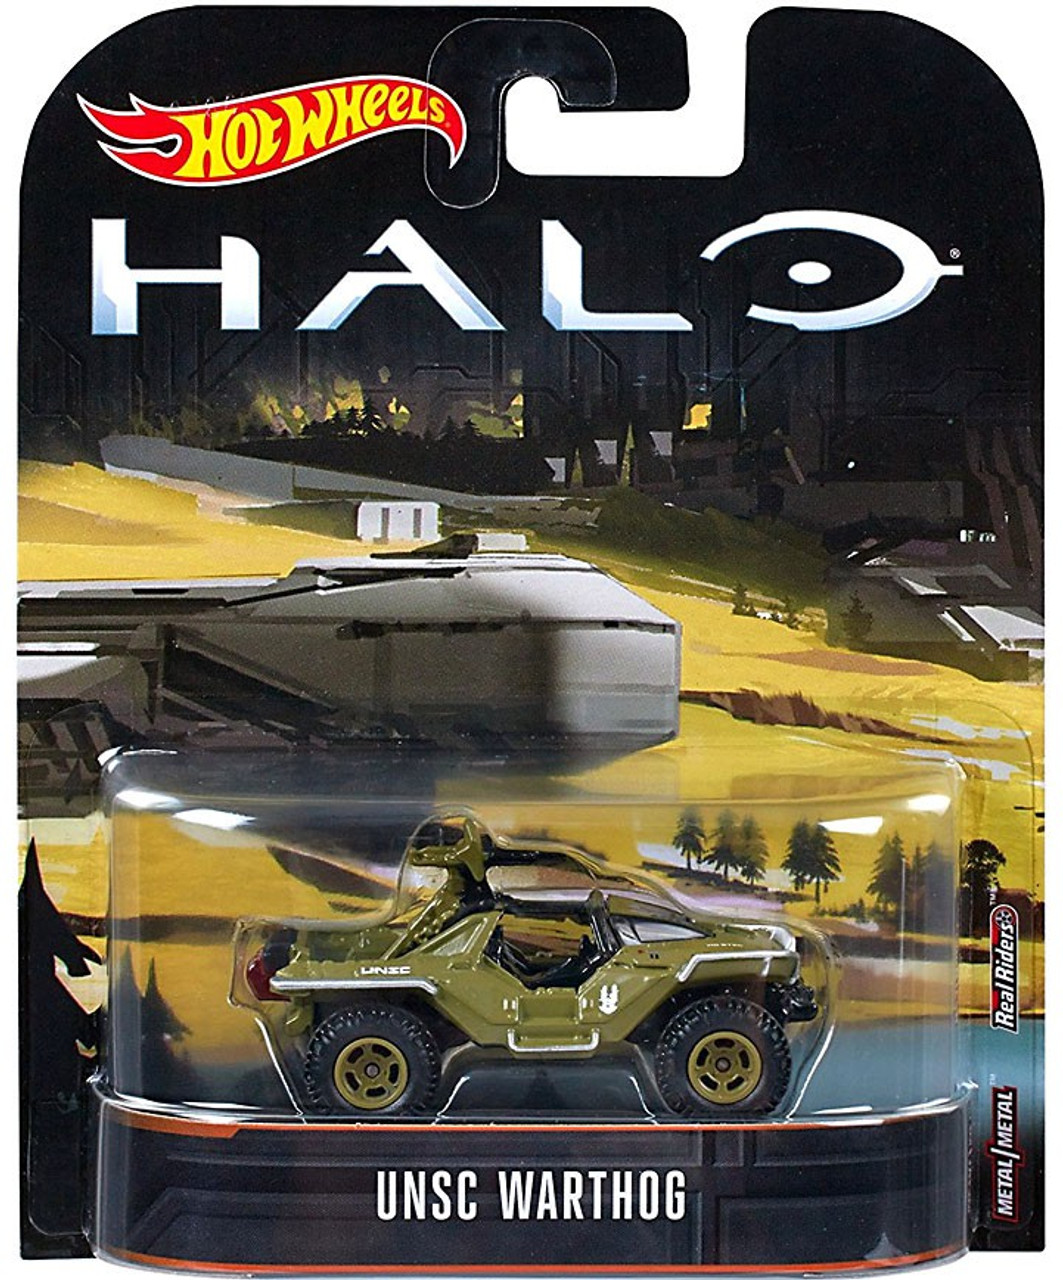 2017 hot wheels entertainment halo new on card covenant ghost.